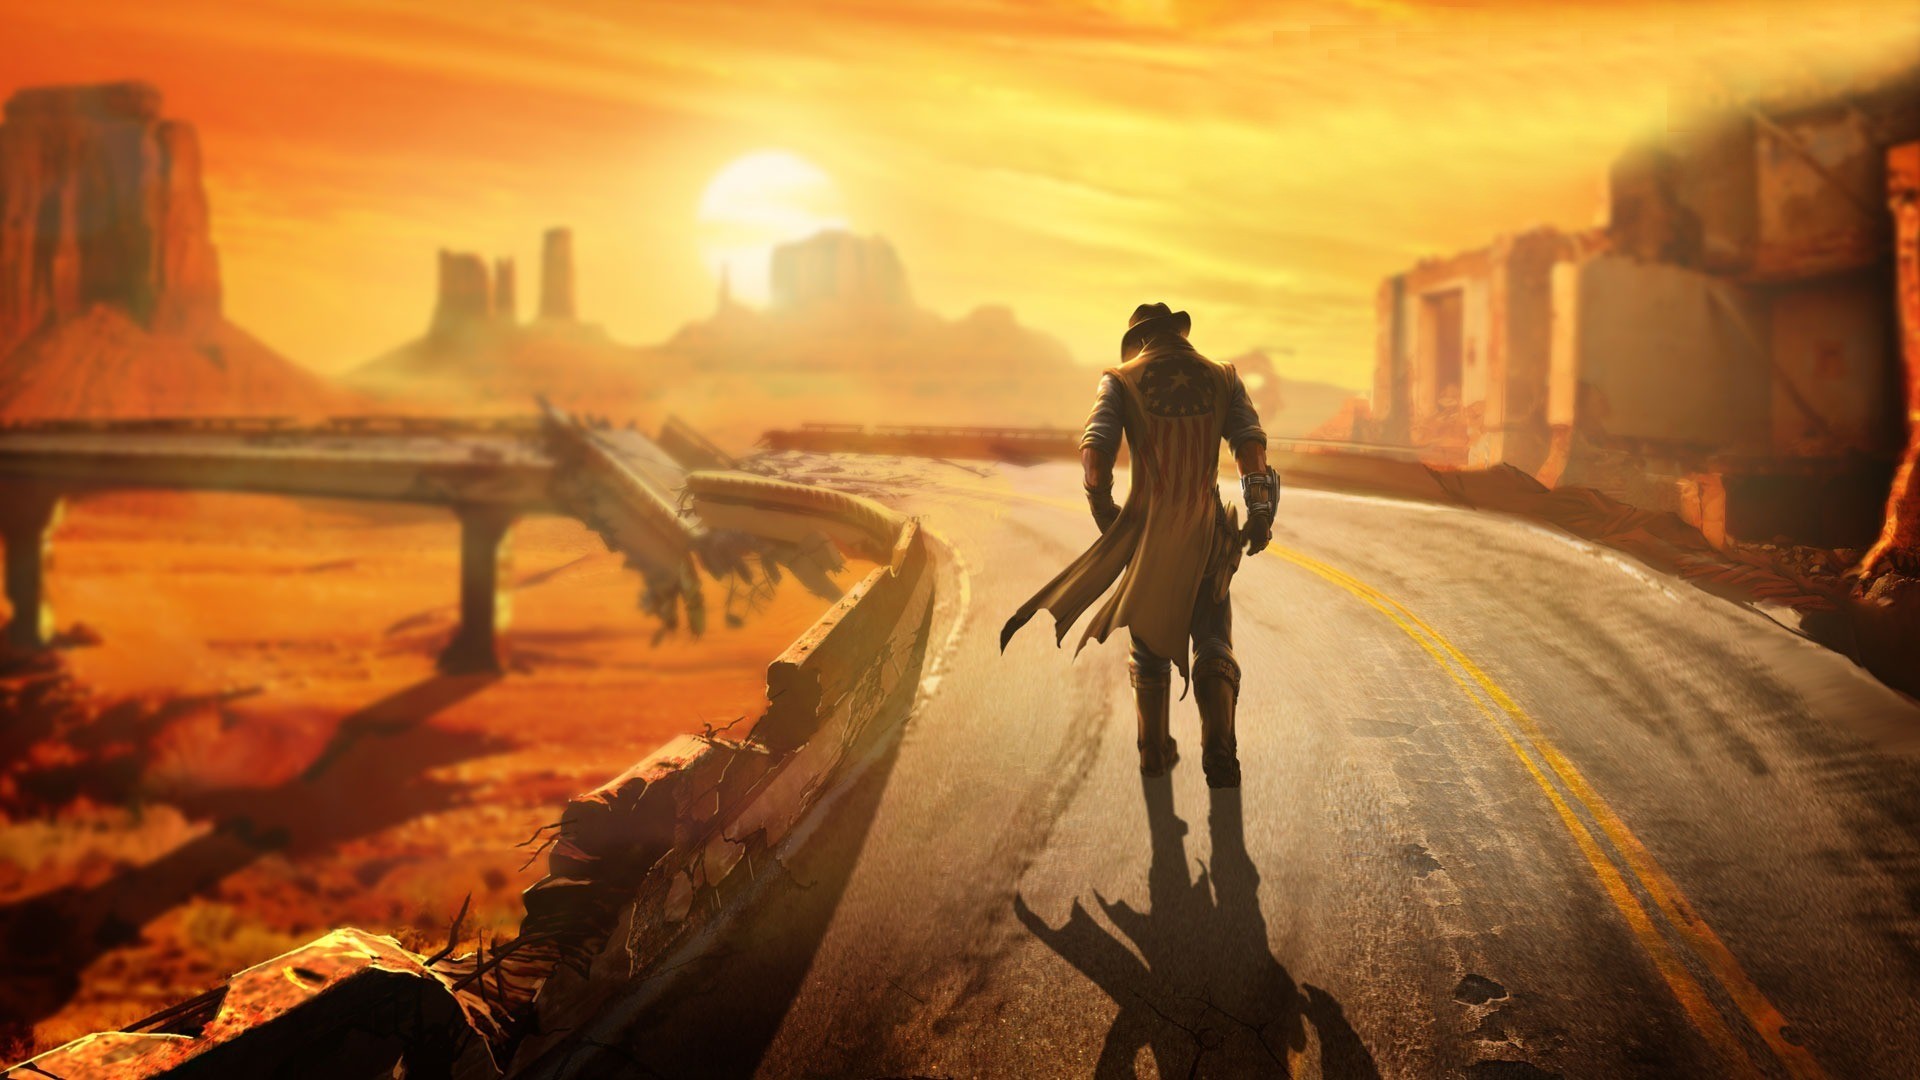 General 1920x1080 Fallout Fallout: New Vegas video games PC gaming video game art sky landscape ruins sunlight